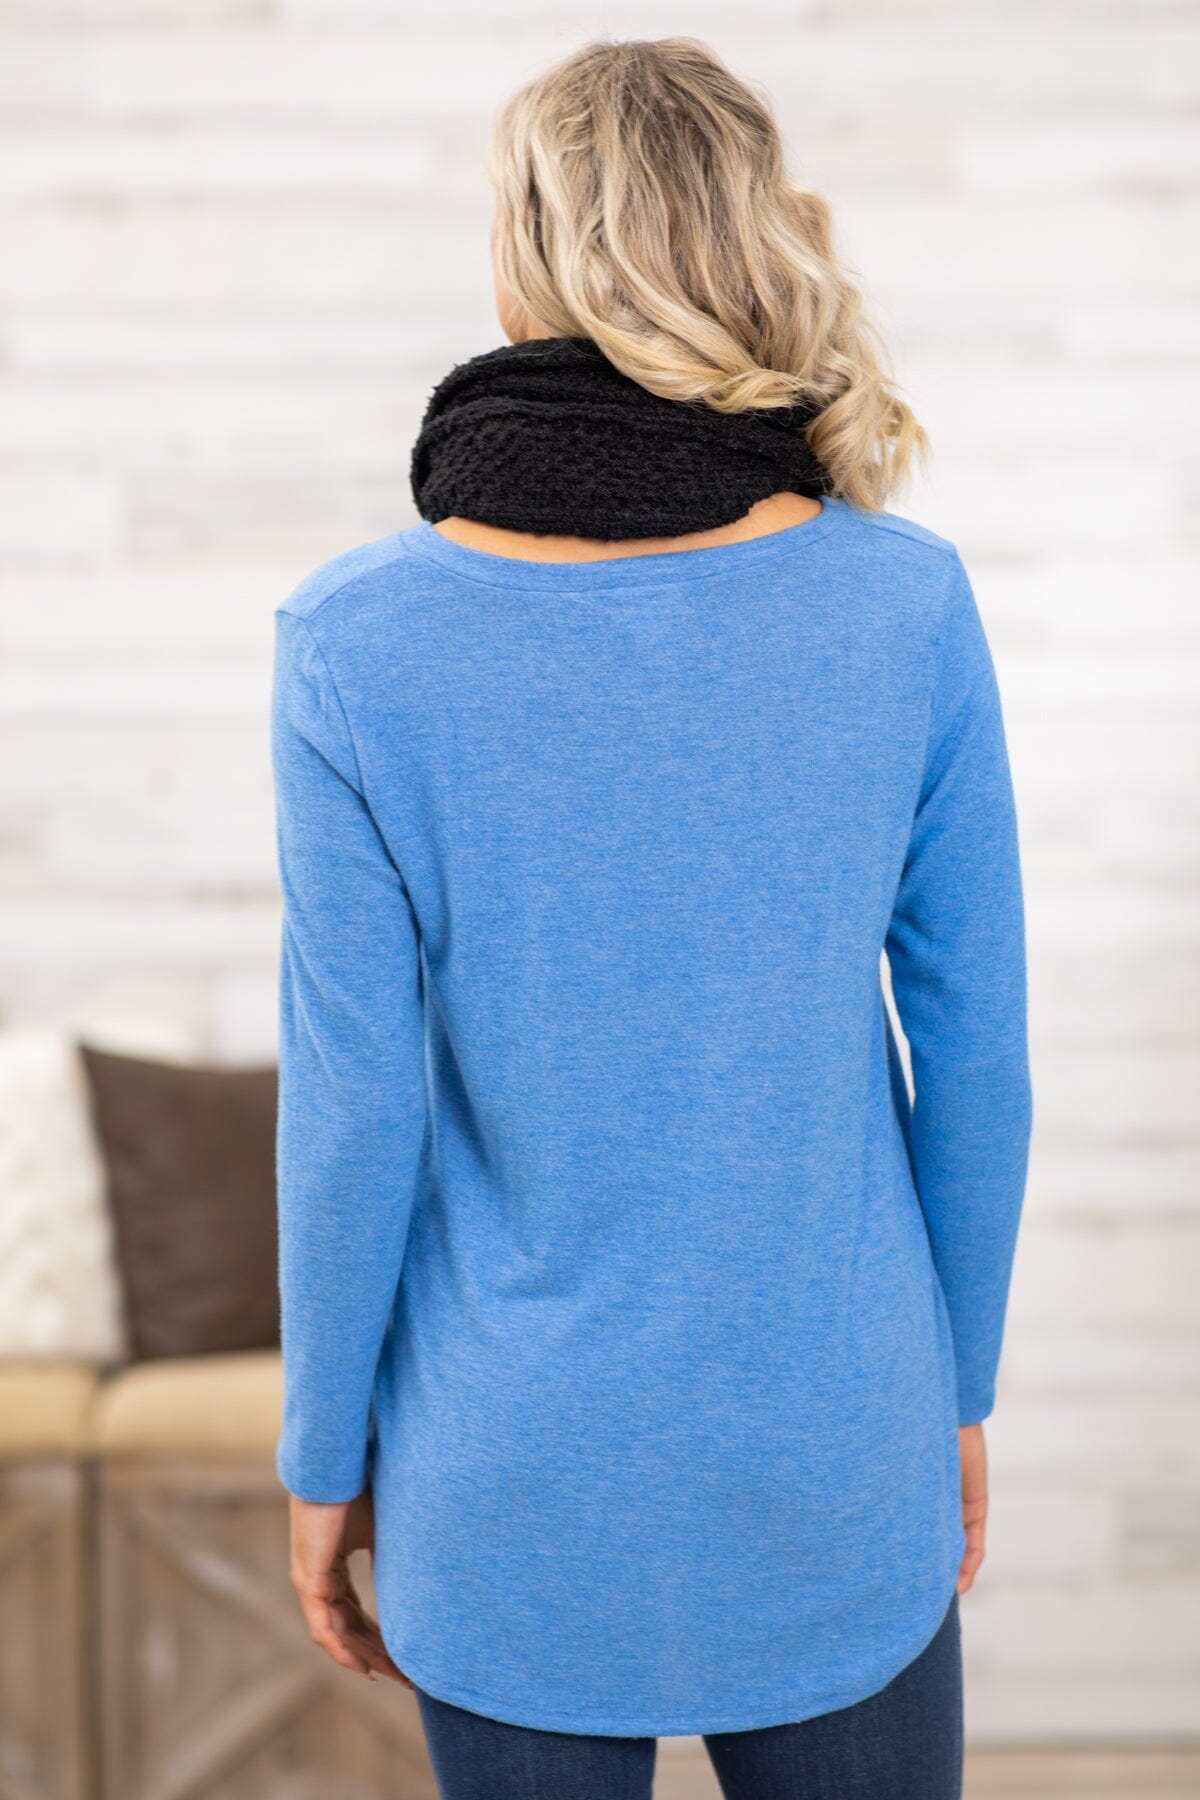 Cornflower Top and Black Infinity Scarf Bundle - Filly Flair